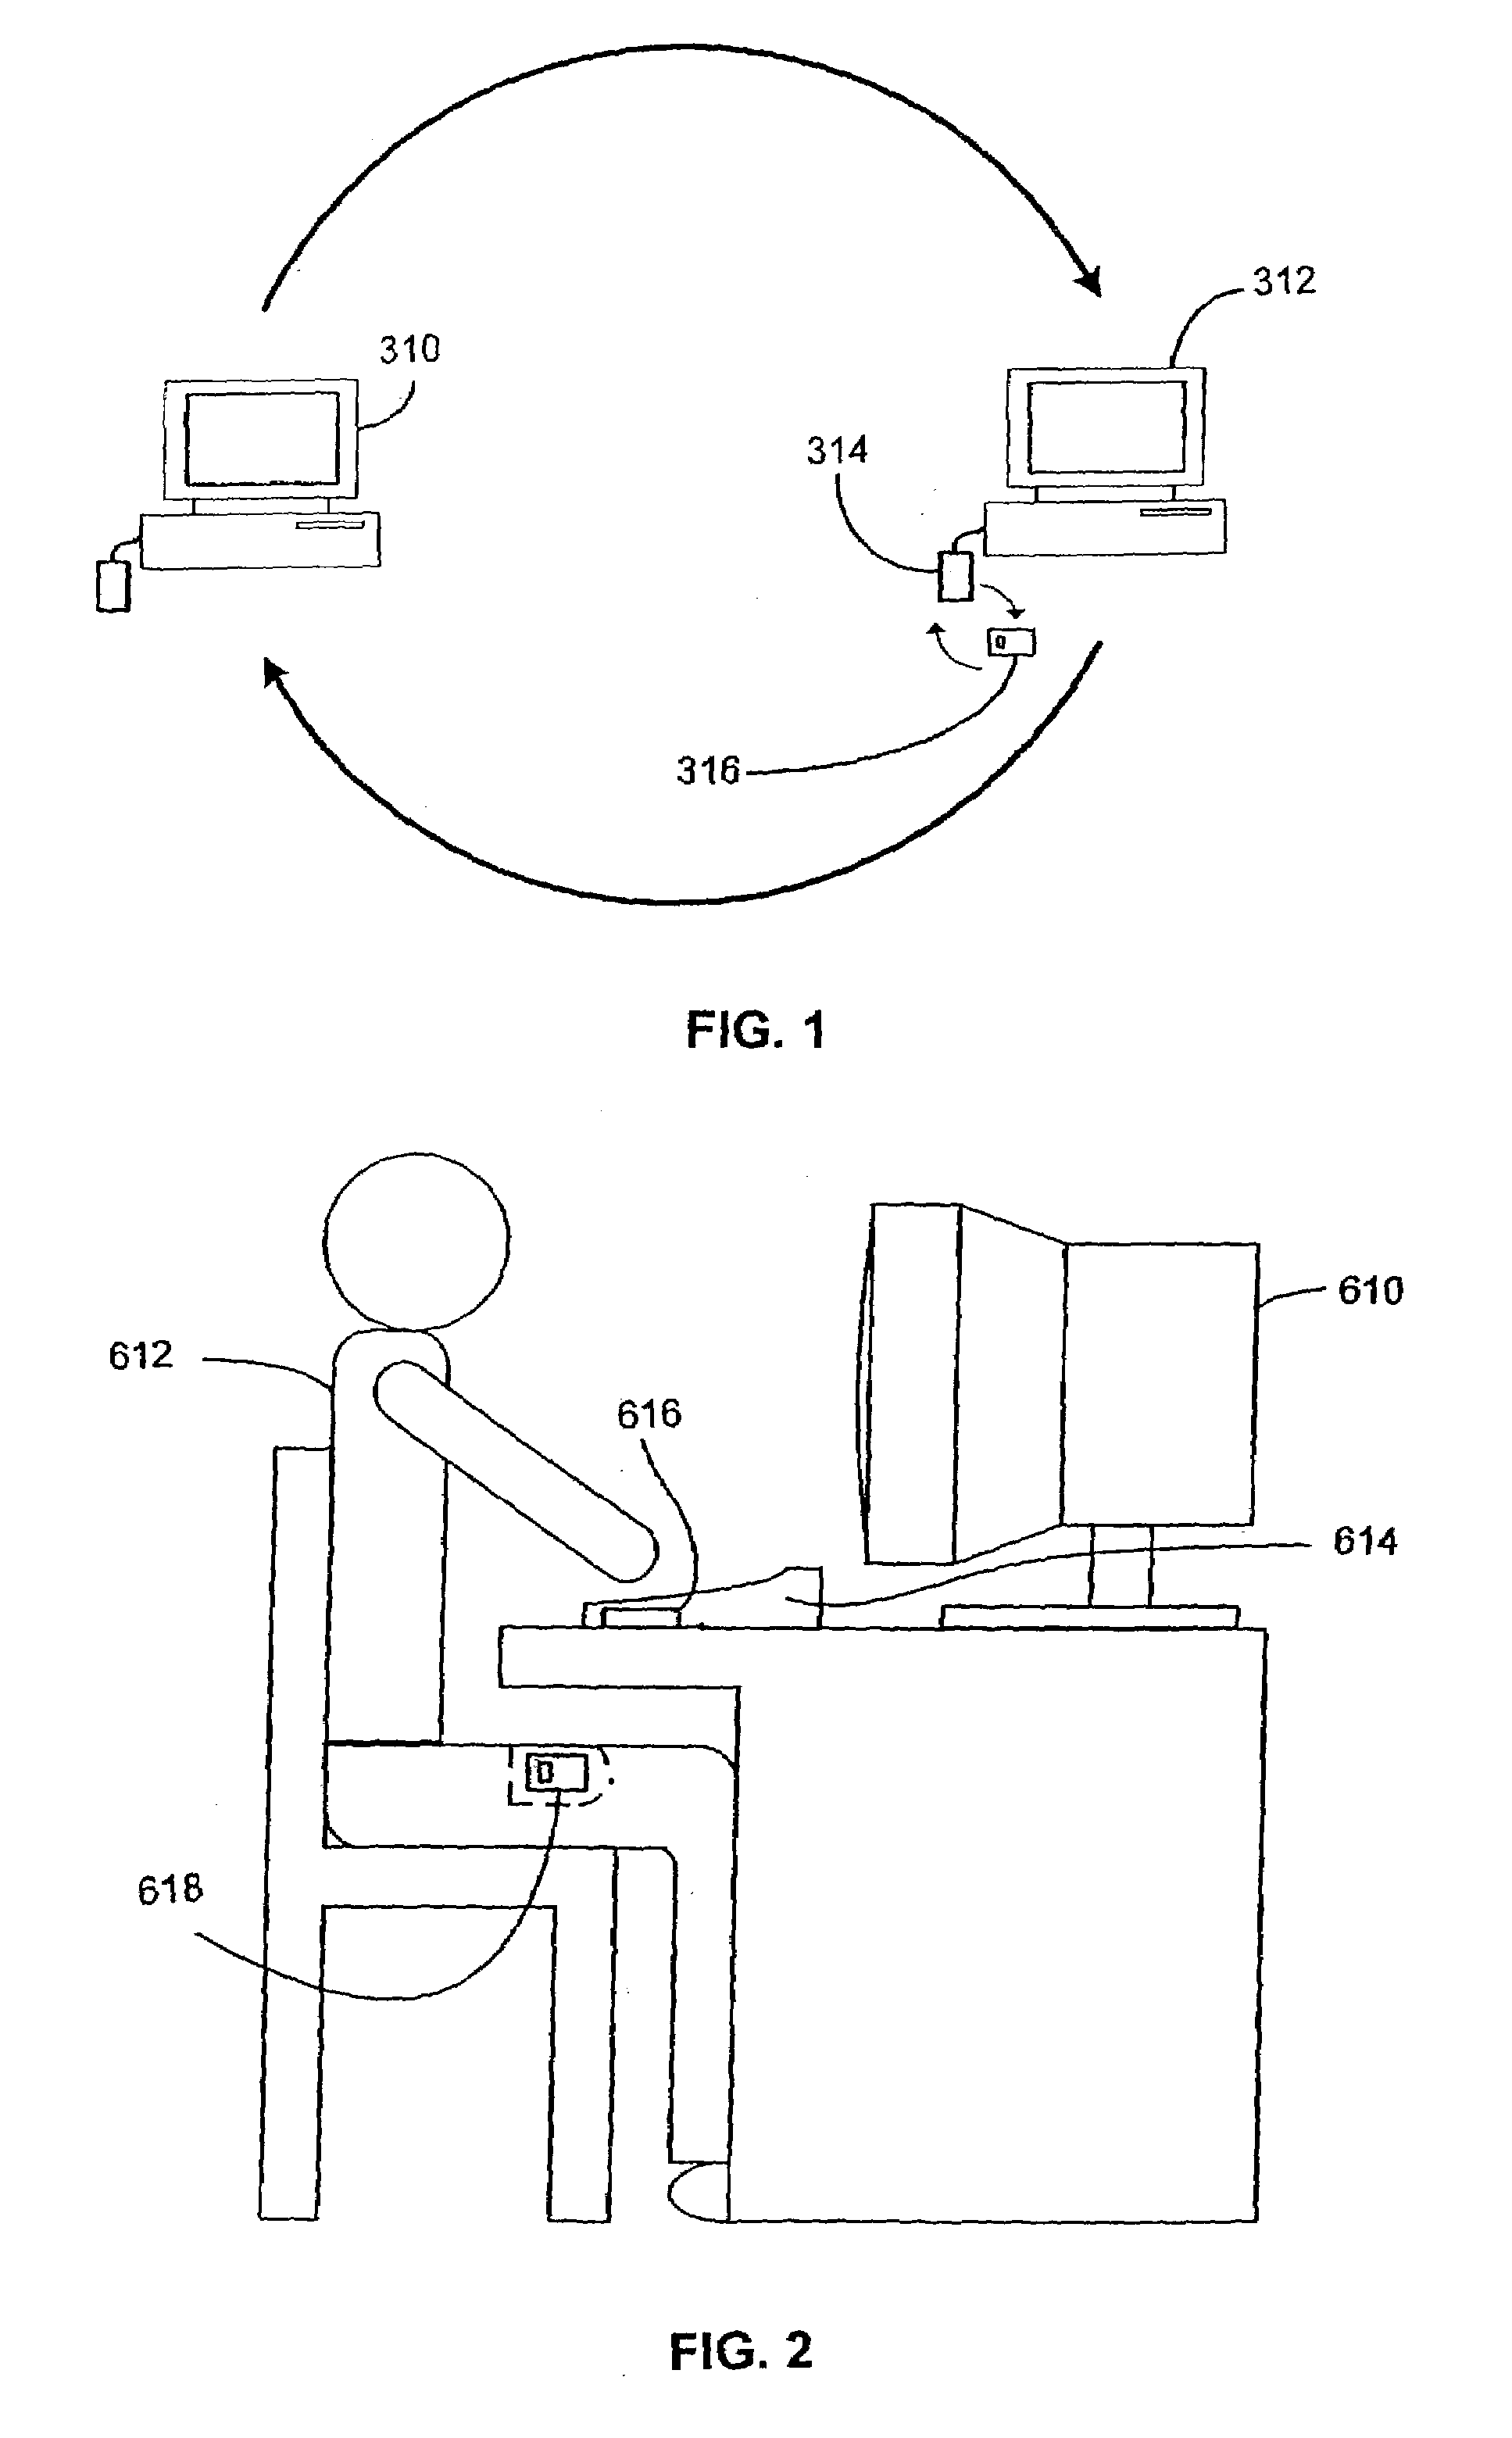 Method and apparatus for wirelessly establishing user preference settings on a computer